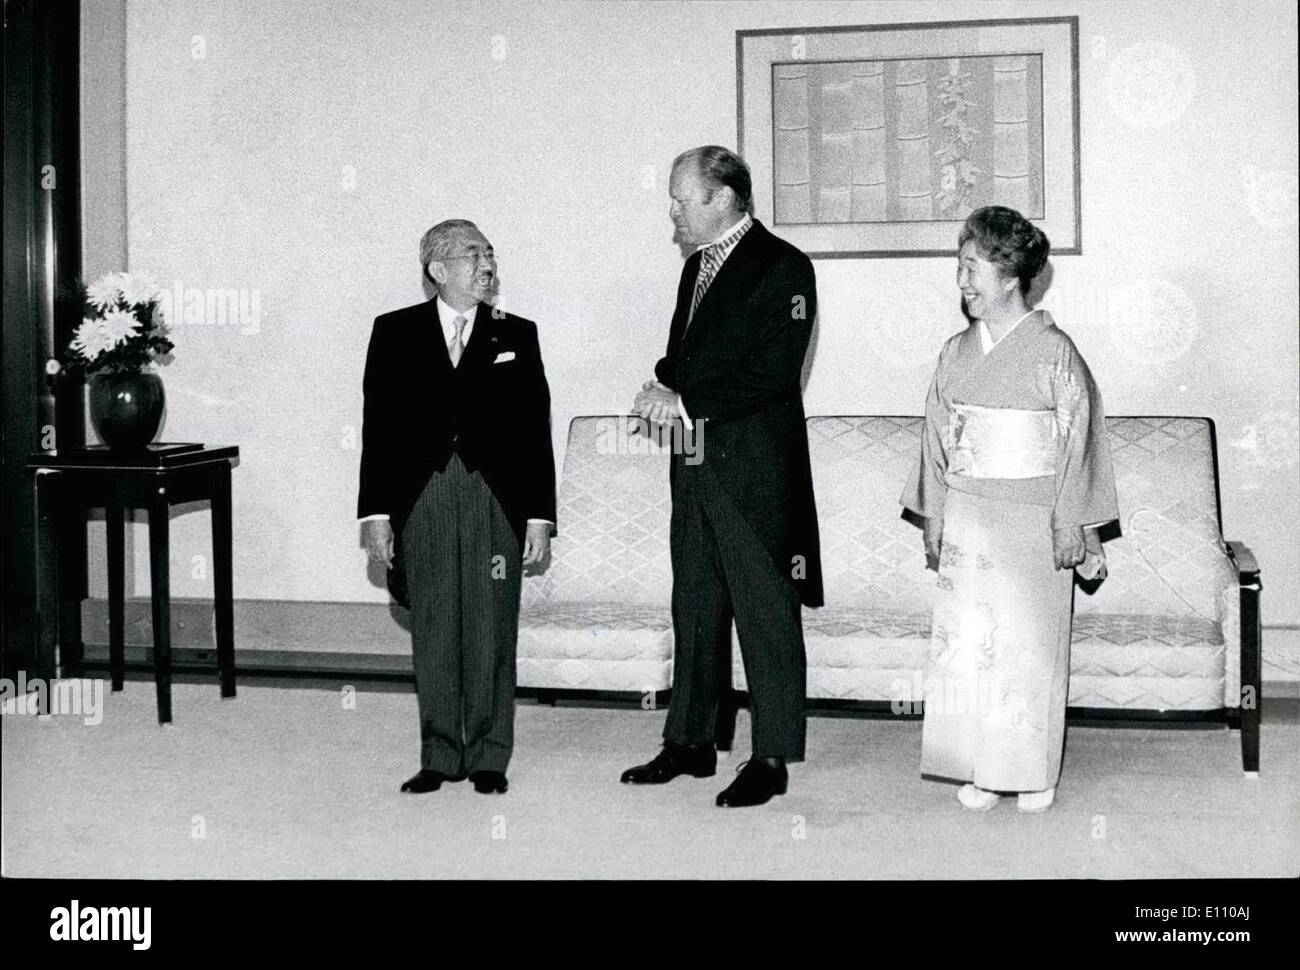 Nov. 11, 1974 - President Ford visits Japan. President Gerald ford is received by Emperor Hirohito and Empress Negato at the Imperial Palace in Tokyo , soon after his arrival in Tokyo. He is the first U.S. President in office to visit Japan. Stock Photo